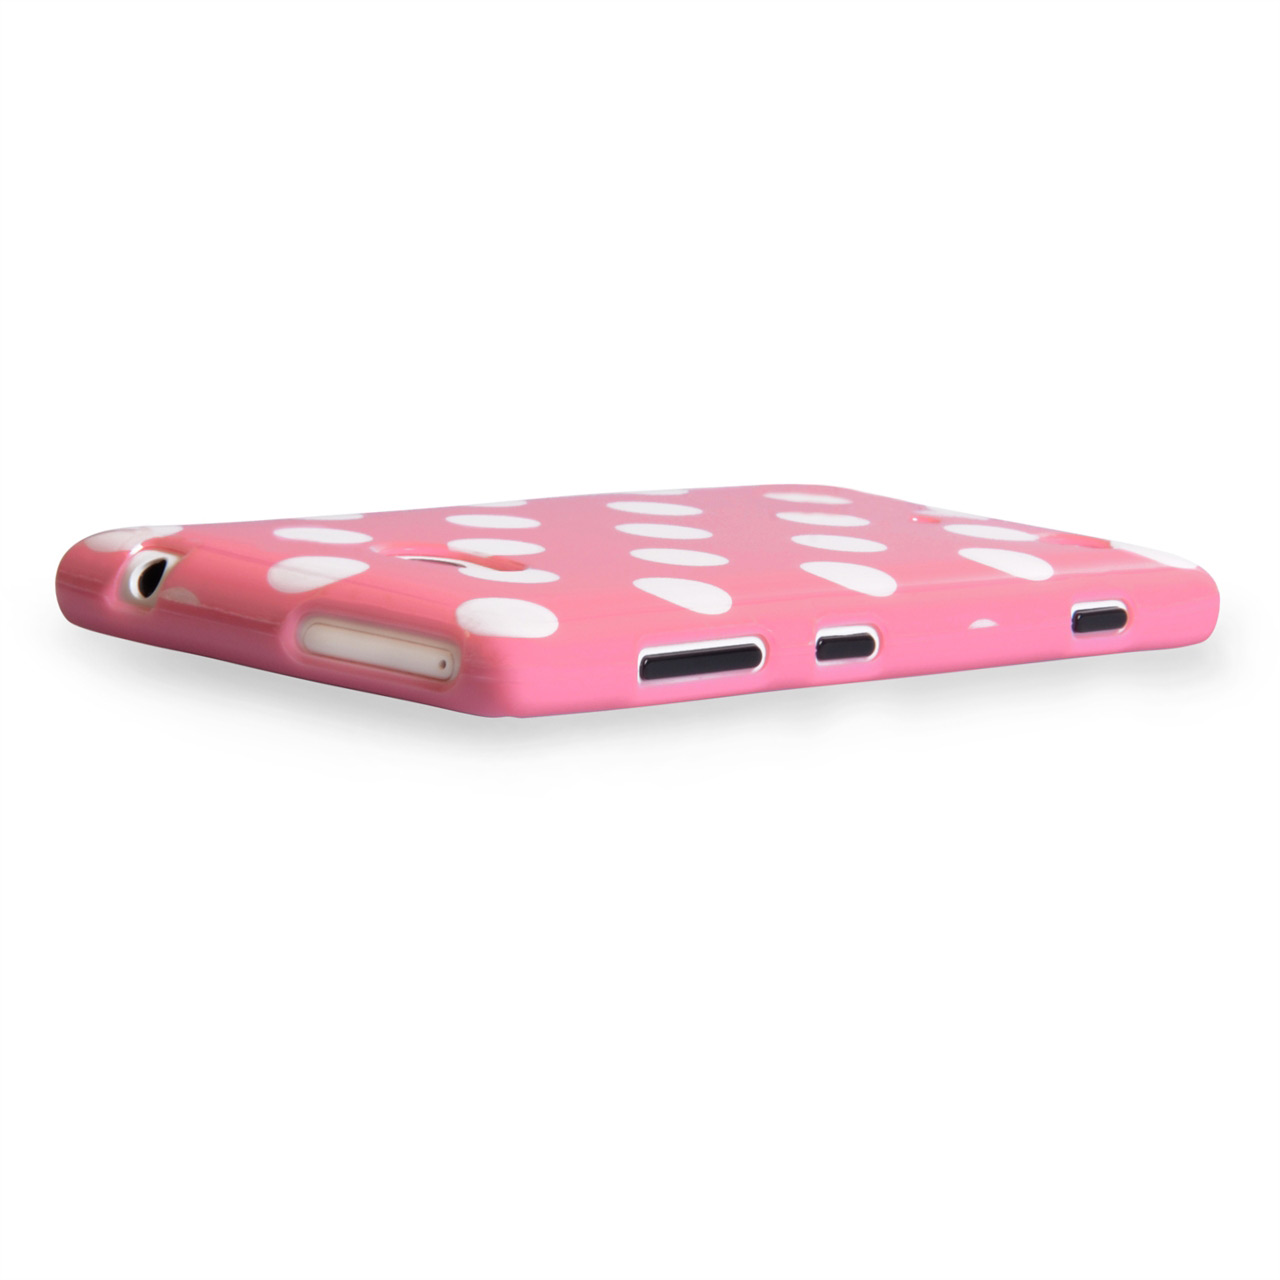 YouSave Accessories Nokia Lumia 720 Polka Dot Case - Baby Pink